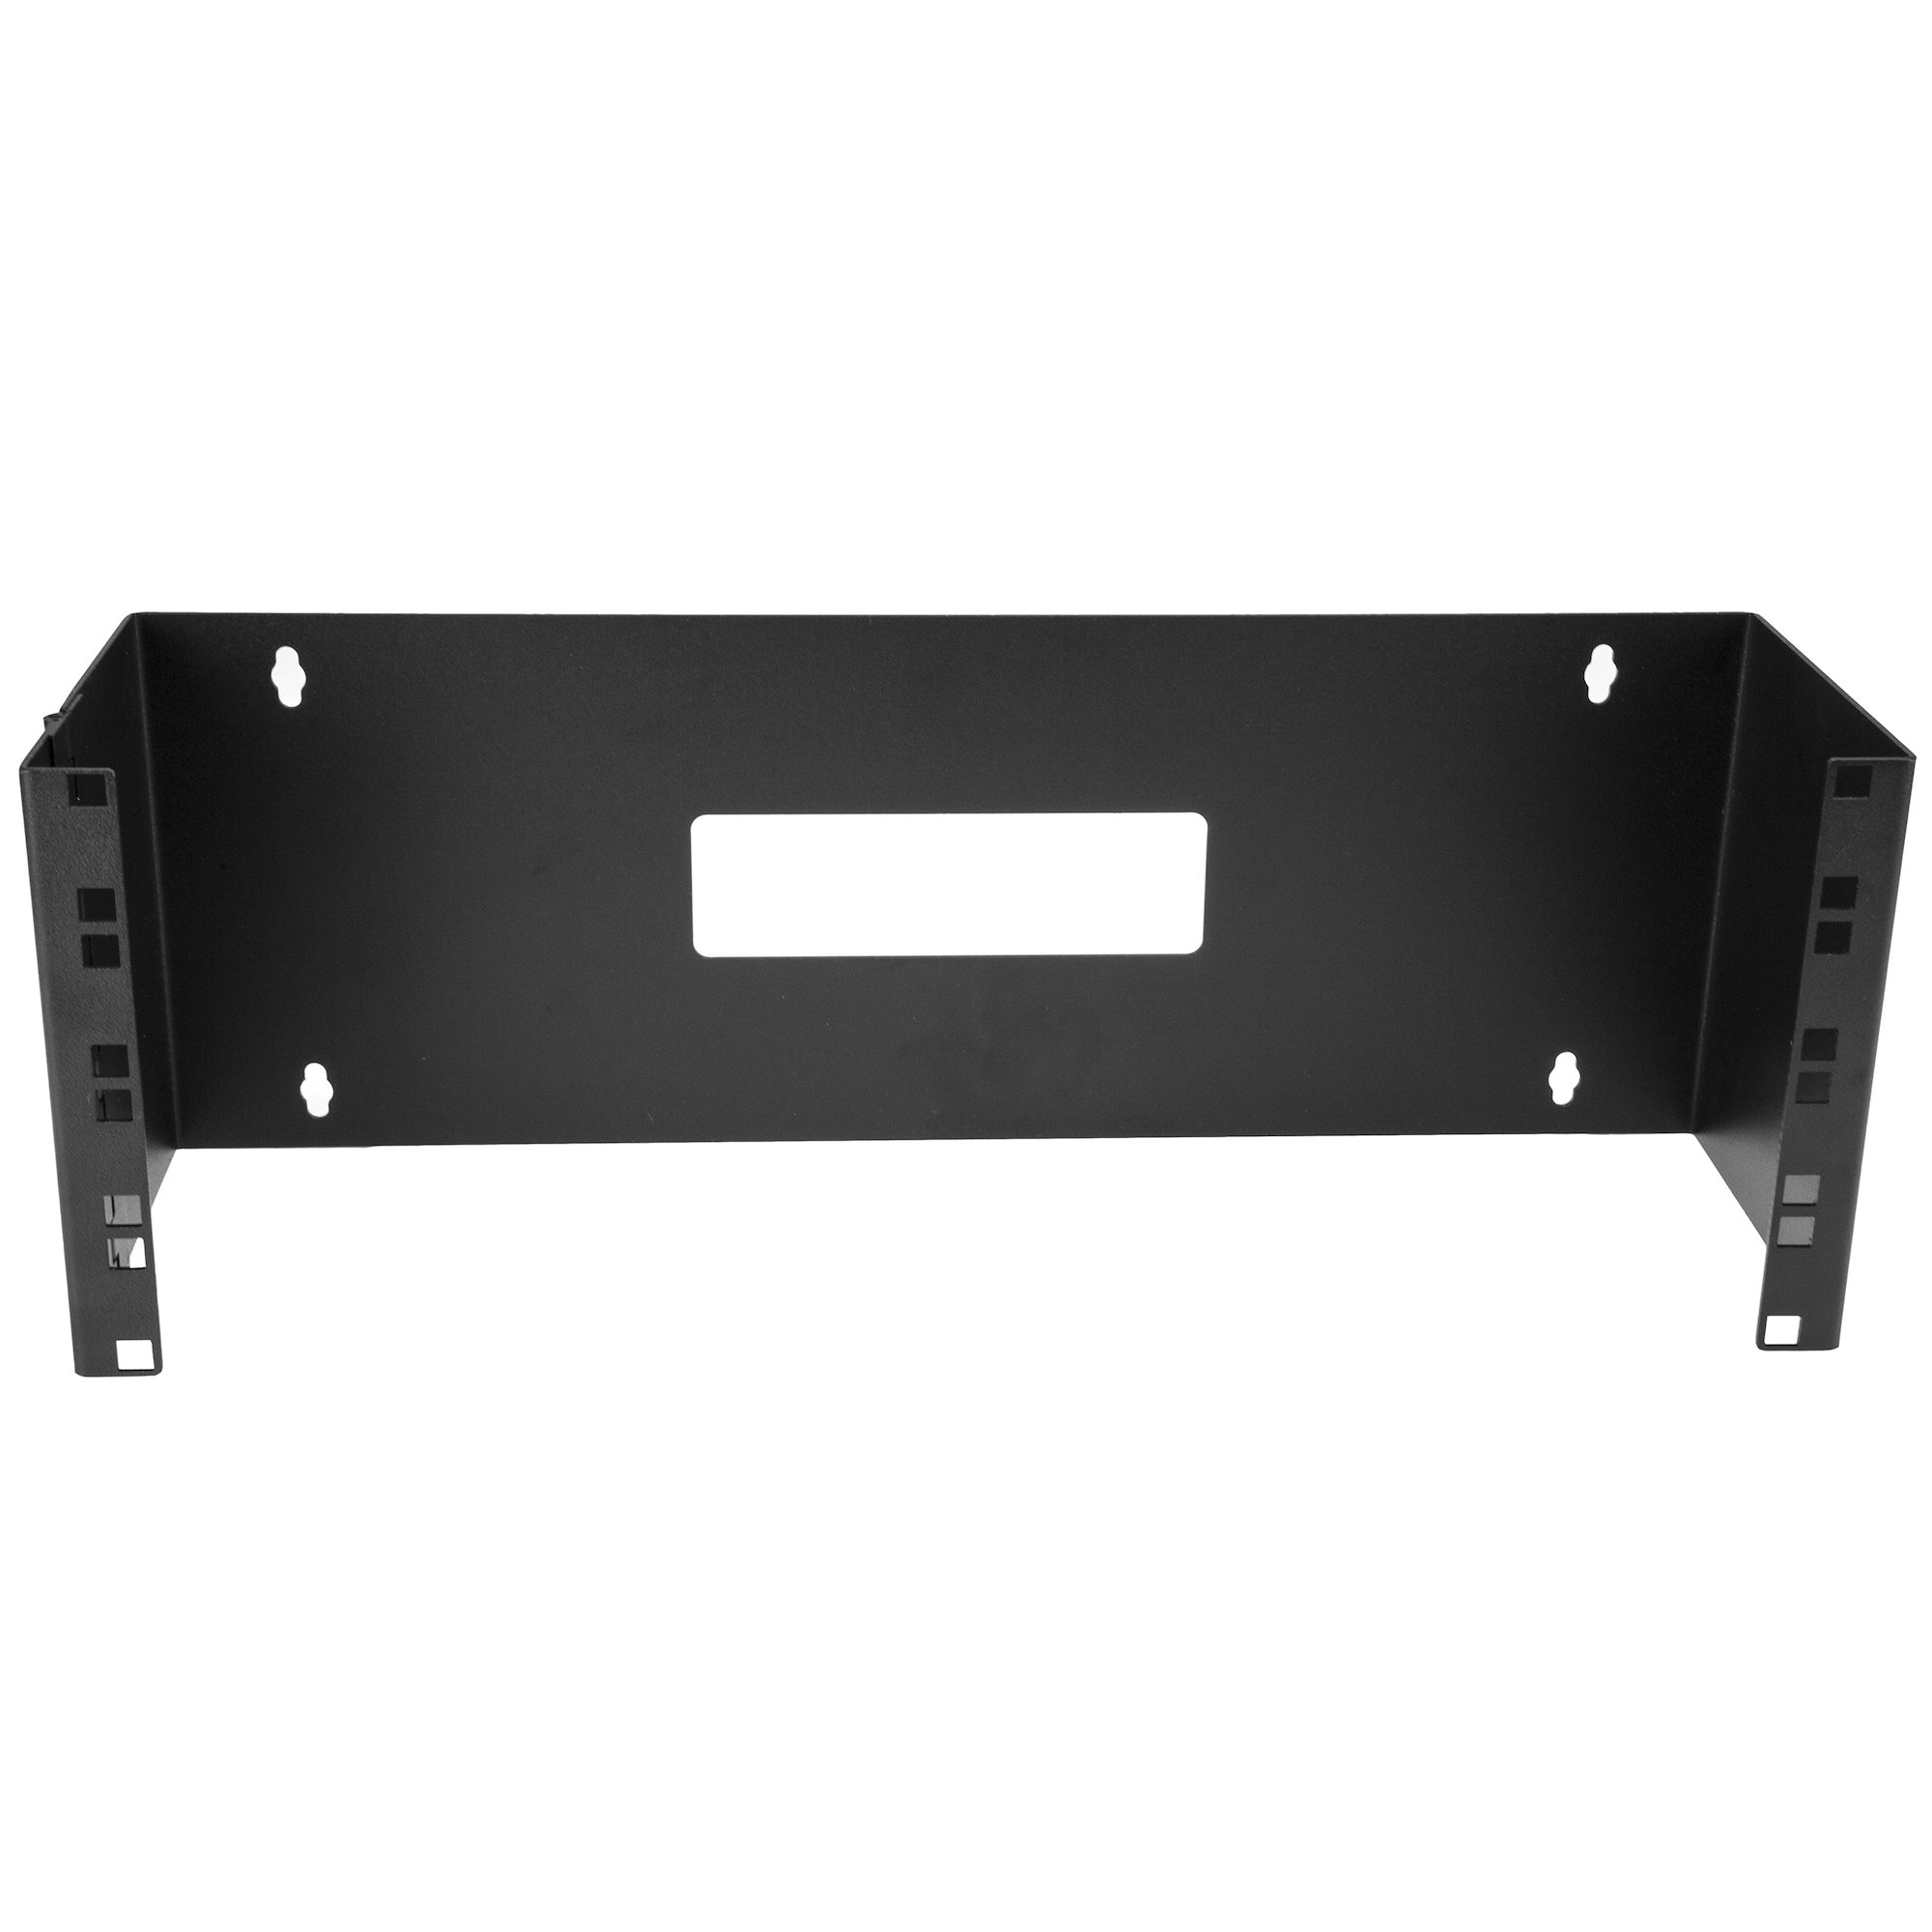 4U Hinged Wall Mount Patch Panel Bracket - 6 inch Deep - 19 Patch Panel  Swing Rack for Shallow Network Equipment- 33lbs